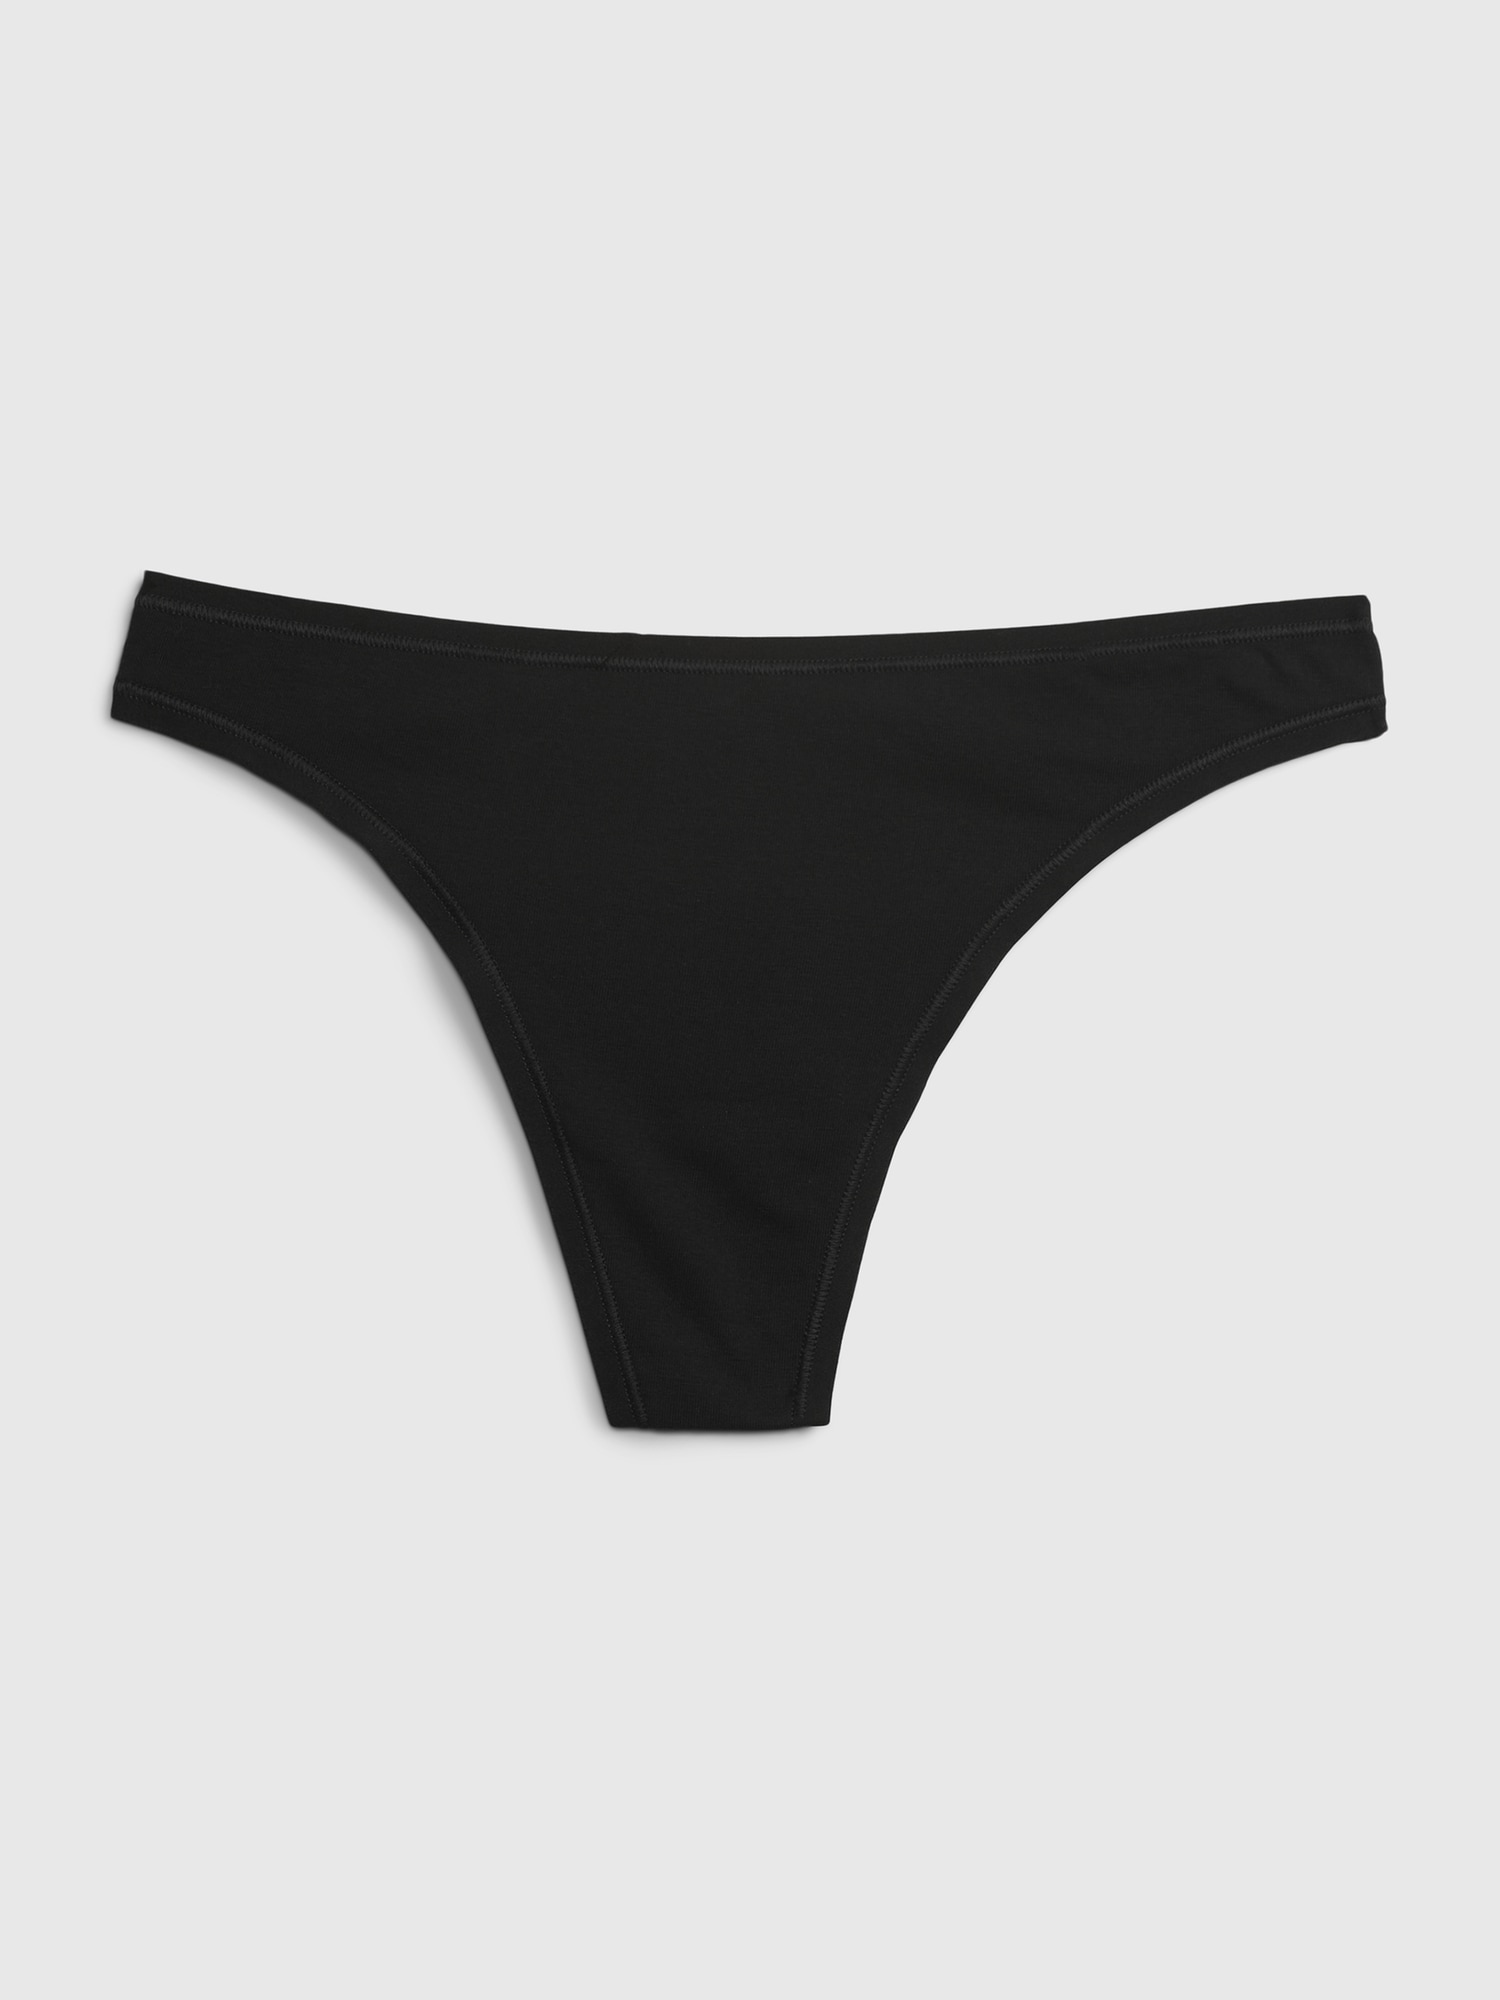 Buy VIKIMO Women's Cotton Thongs for High Level of Comfort - Free Size_V- Thong-Black-Beige-P2 at